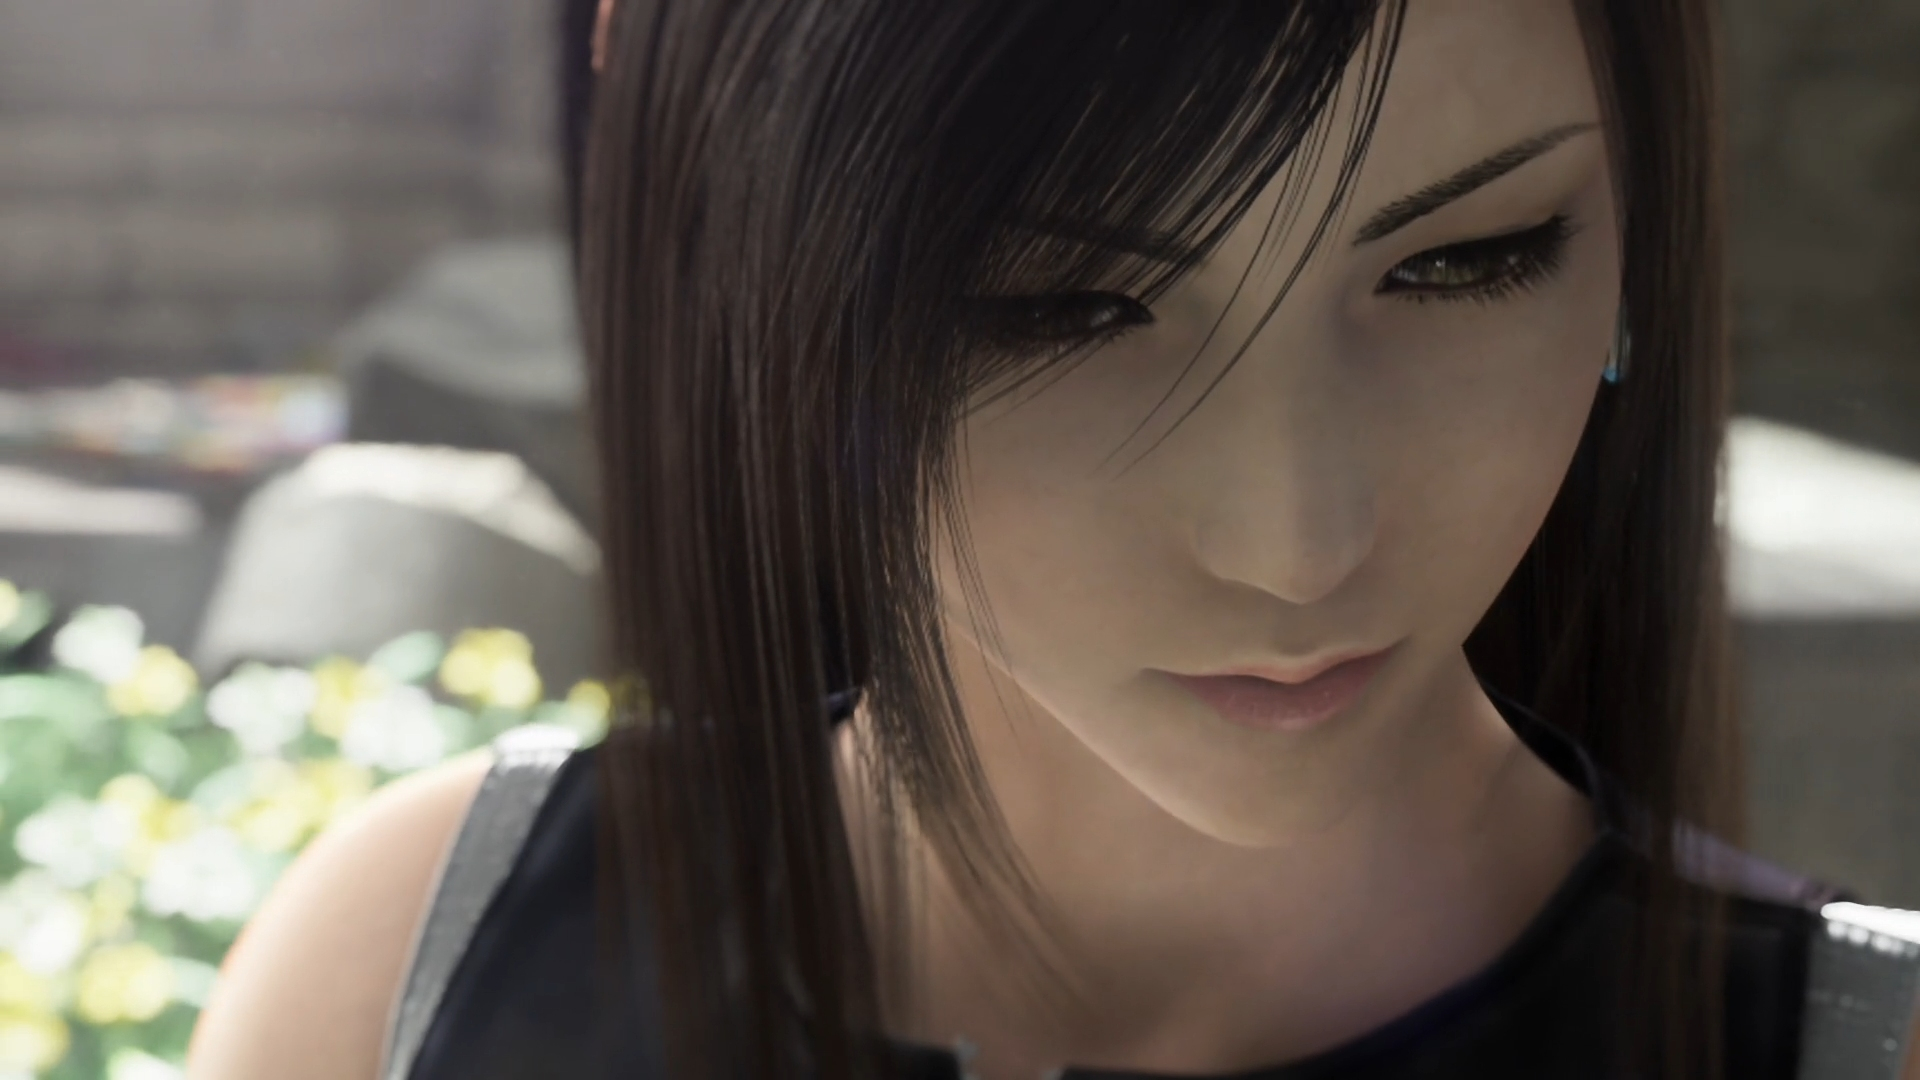 1920x1080 100+ Tifa Lockhart HD Wallpapers and Backgrounds